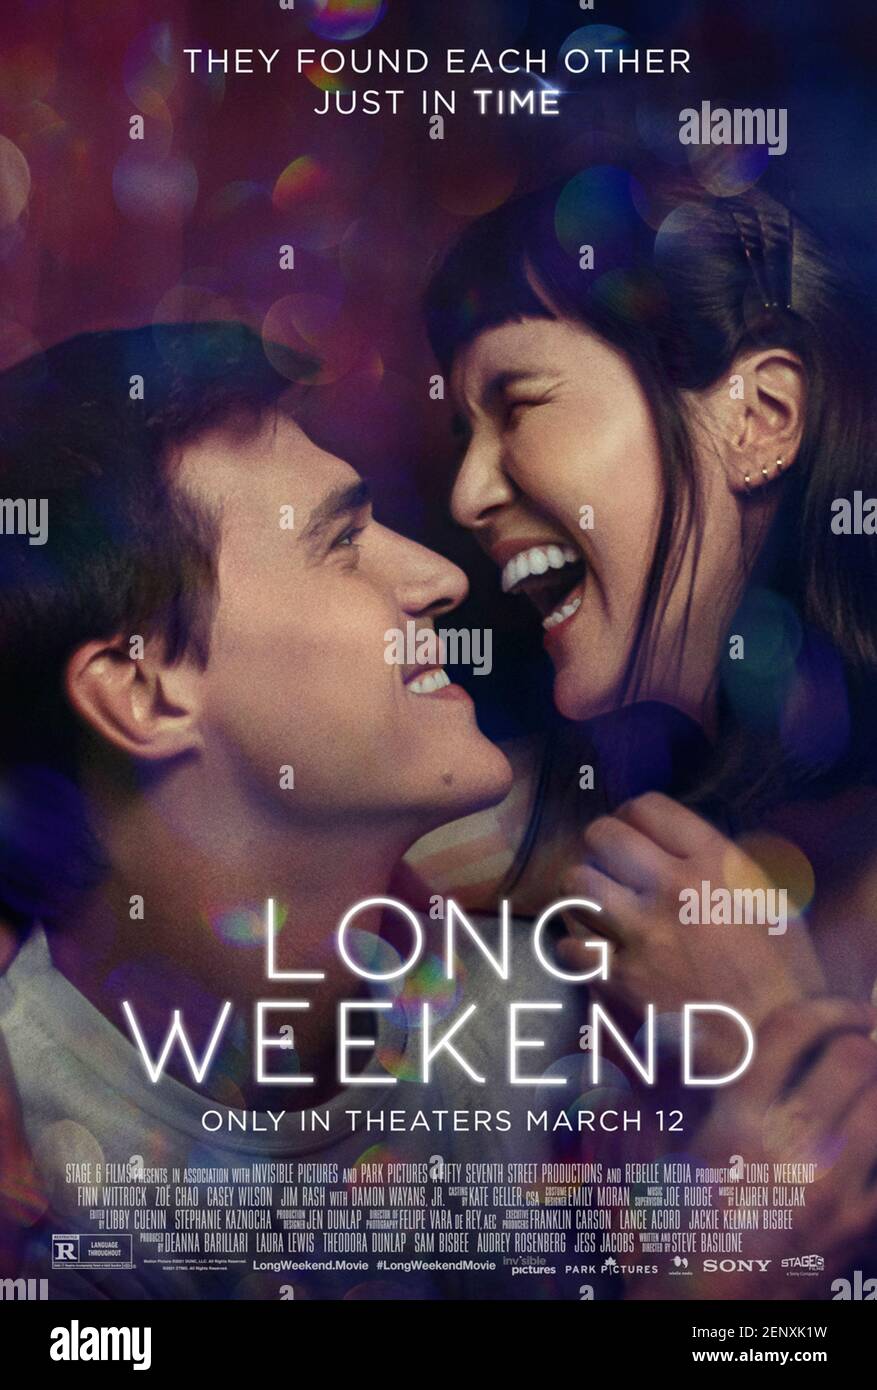 Long Weekend (2021) directed by Stephen Basilone and starring Wendi McLendon-Covey, Damon Wayans Jr. and Finn Wittroc. A down-on-his-luck struggling writer, meets an enigmatic woman who enters his life at the right time. Stock Photo